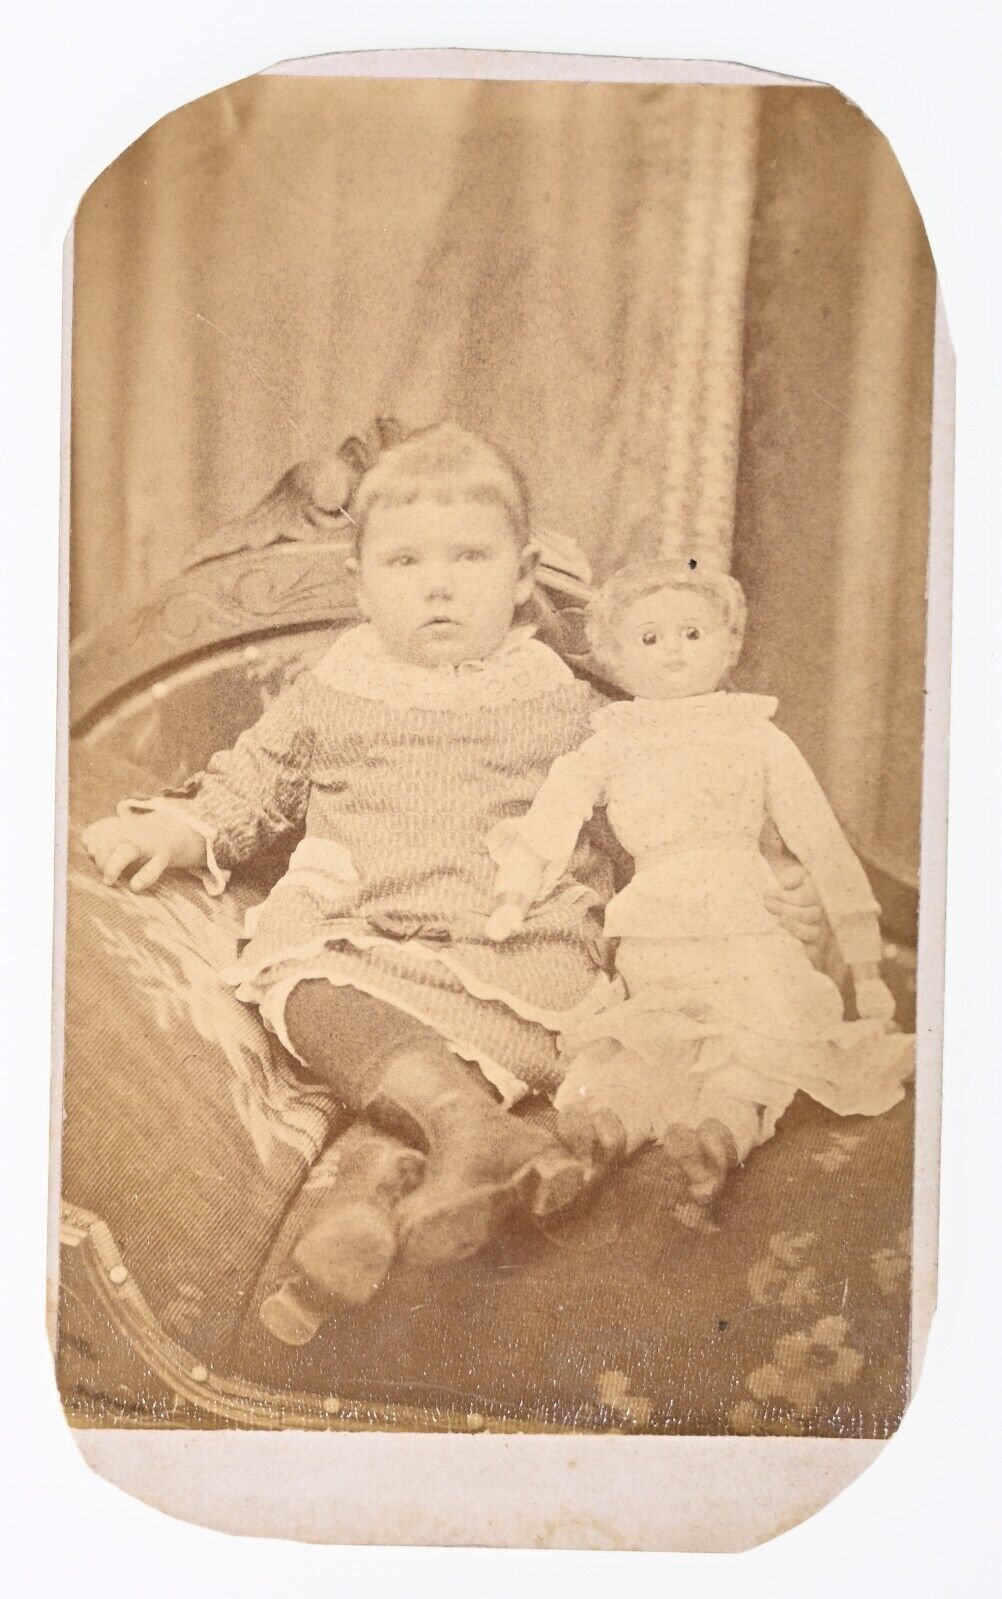 ANTIQUE CDV C. 1870s E.H. CURTISS CUTE YOUNG GIRL WITH HER DOLL NEW LONDSON OHIO